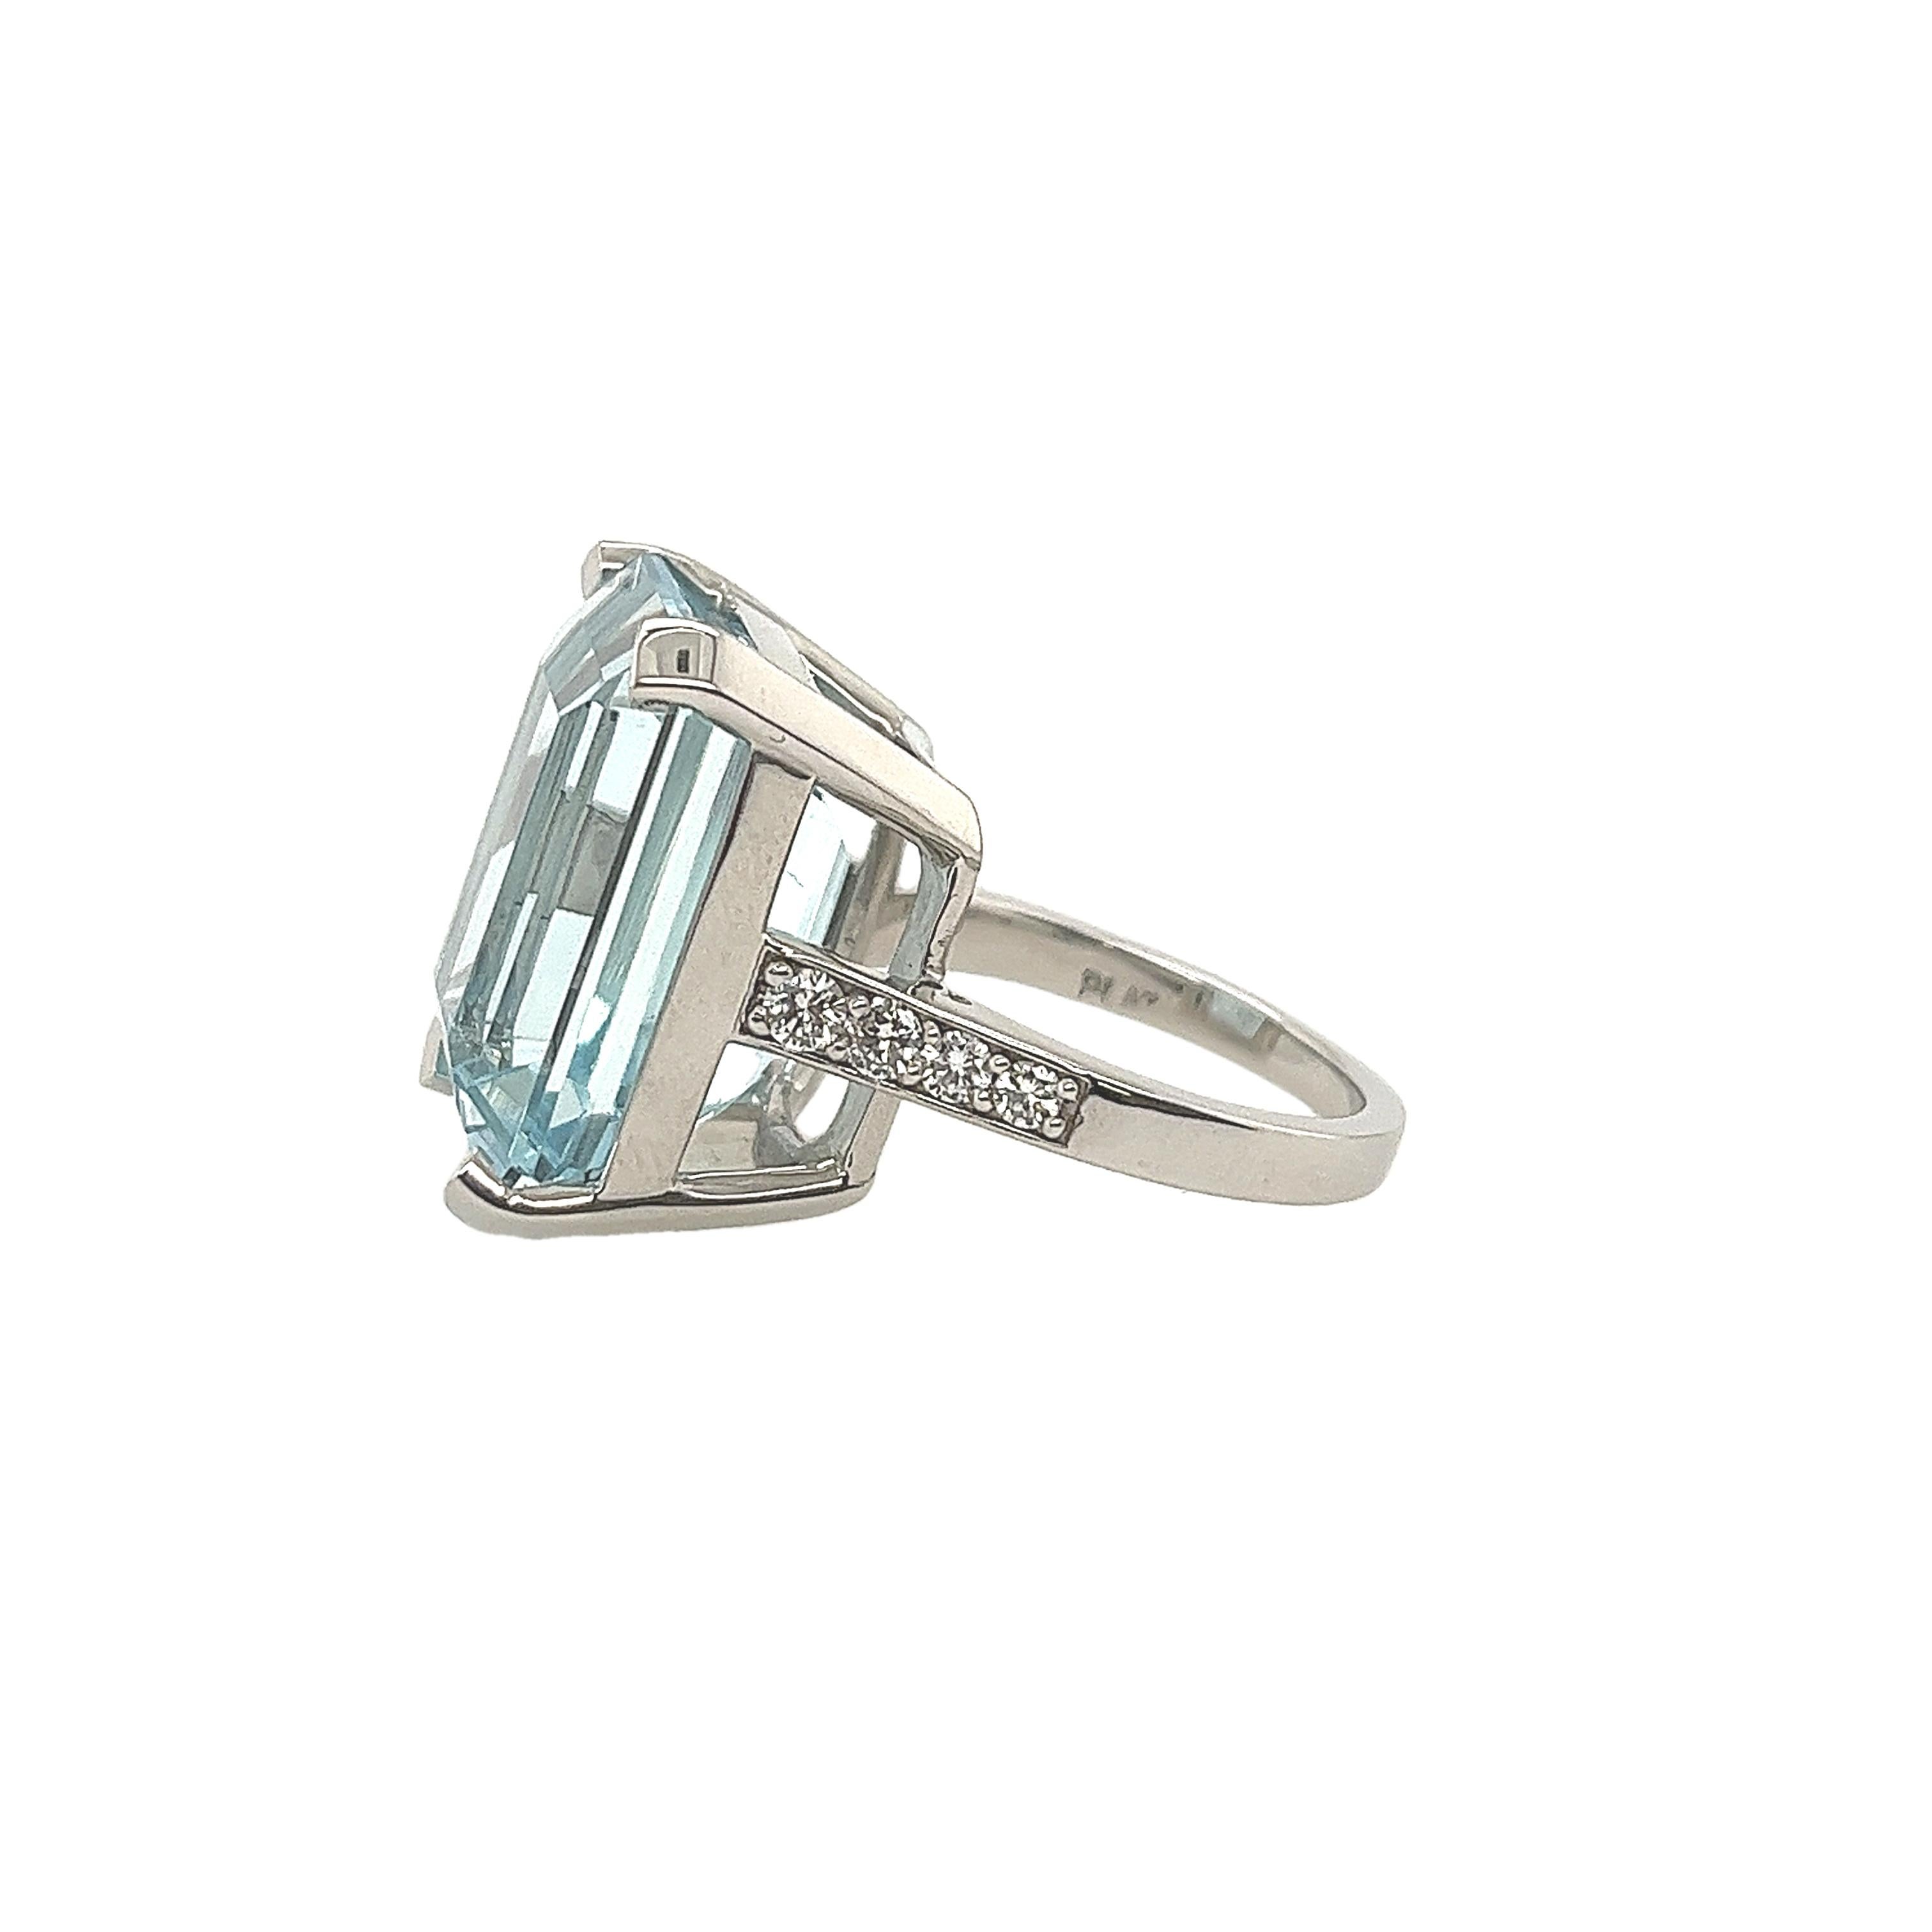 The aquamarine is the birthstone for March.
This beautiful ring features a 23.5ct emerald cut aquamarine,
set in a platinum band. 
The ring is decorated with 4 round brilliant diamonds on each shoulder.
Total Diamond Weight: 0.20ct 
Diamond Colour: